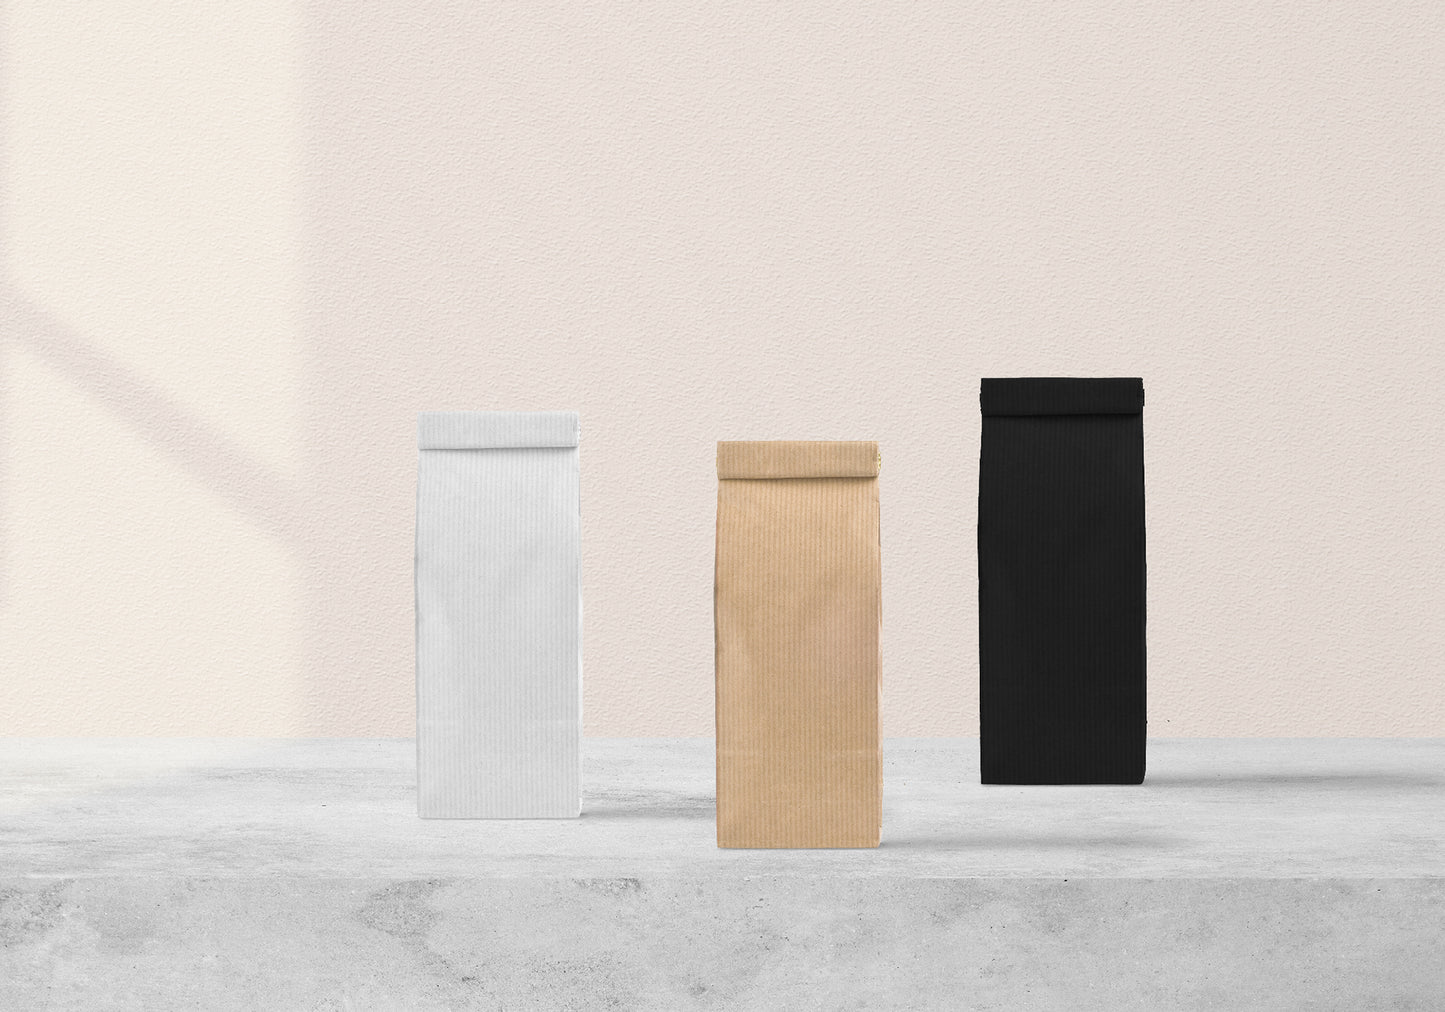 Free Packaging PSD Mockup for Coffee Bag